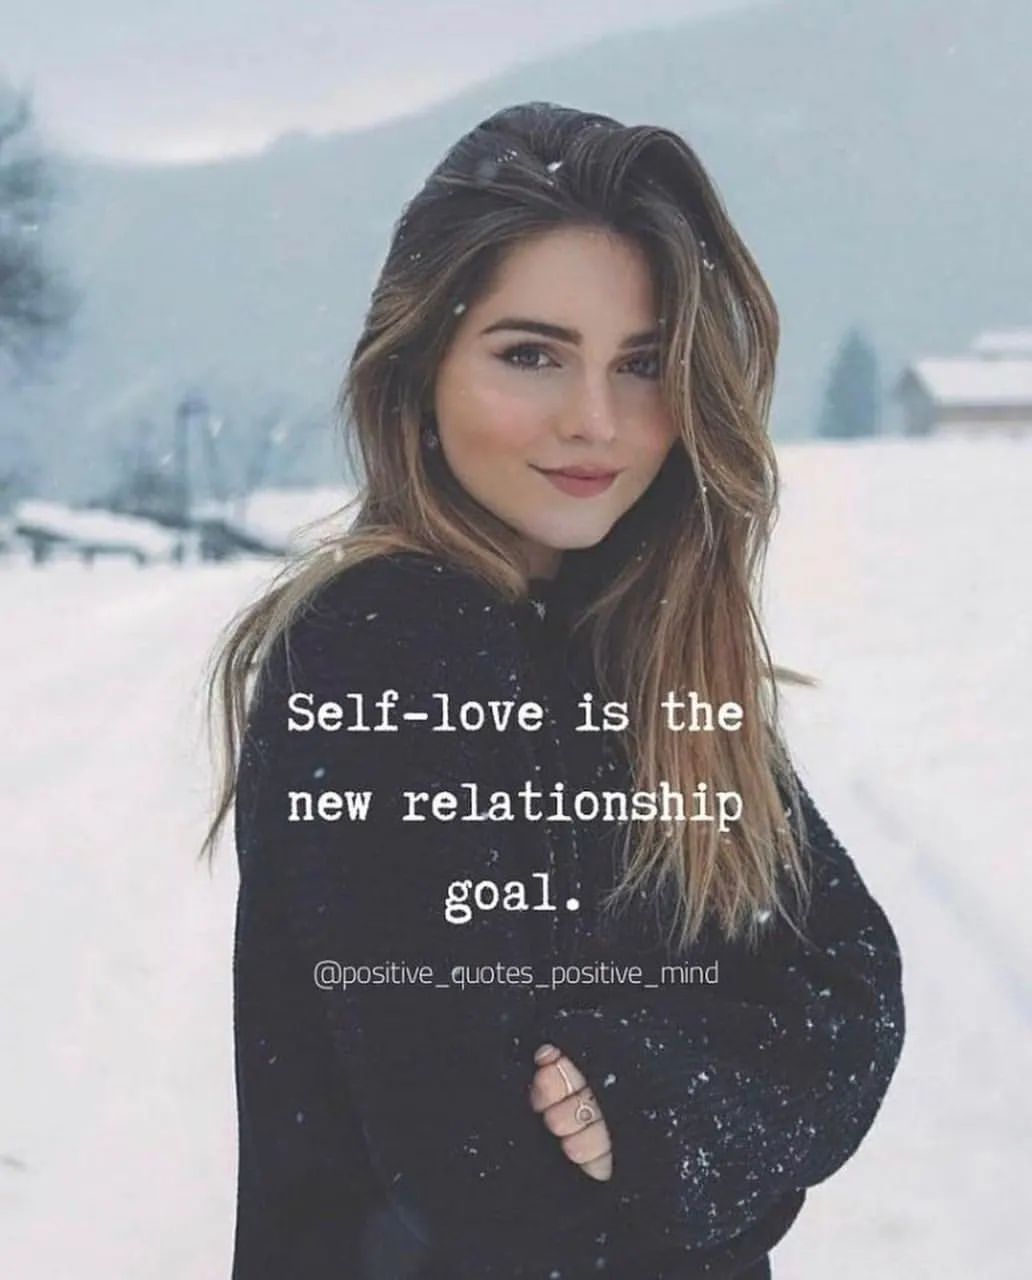 Seld-love is the new relationship goal.